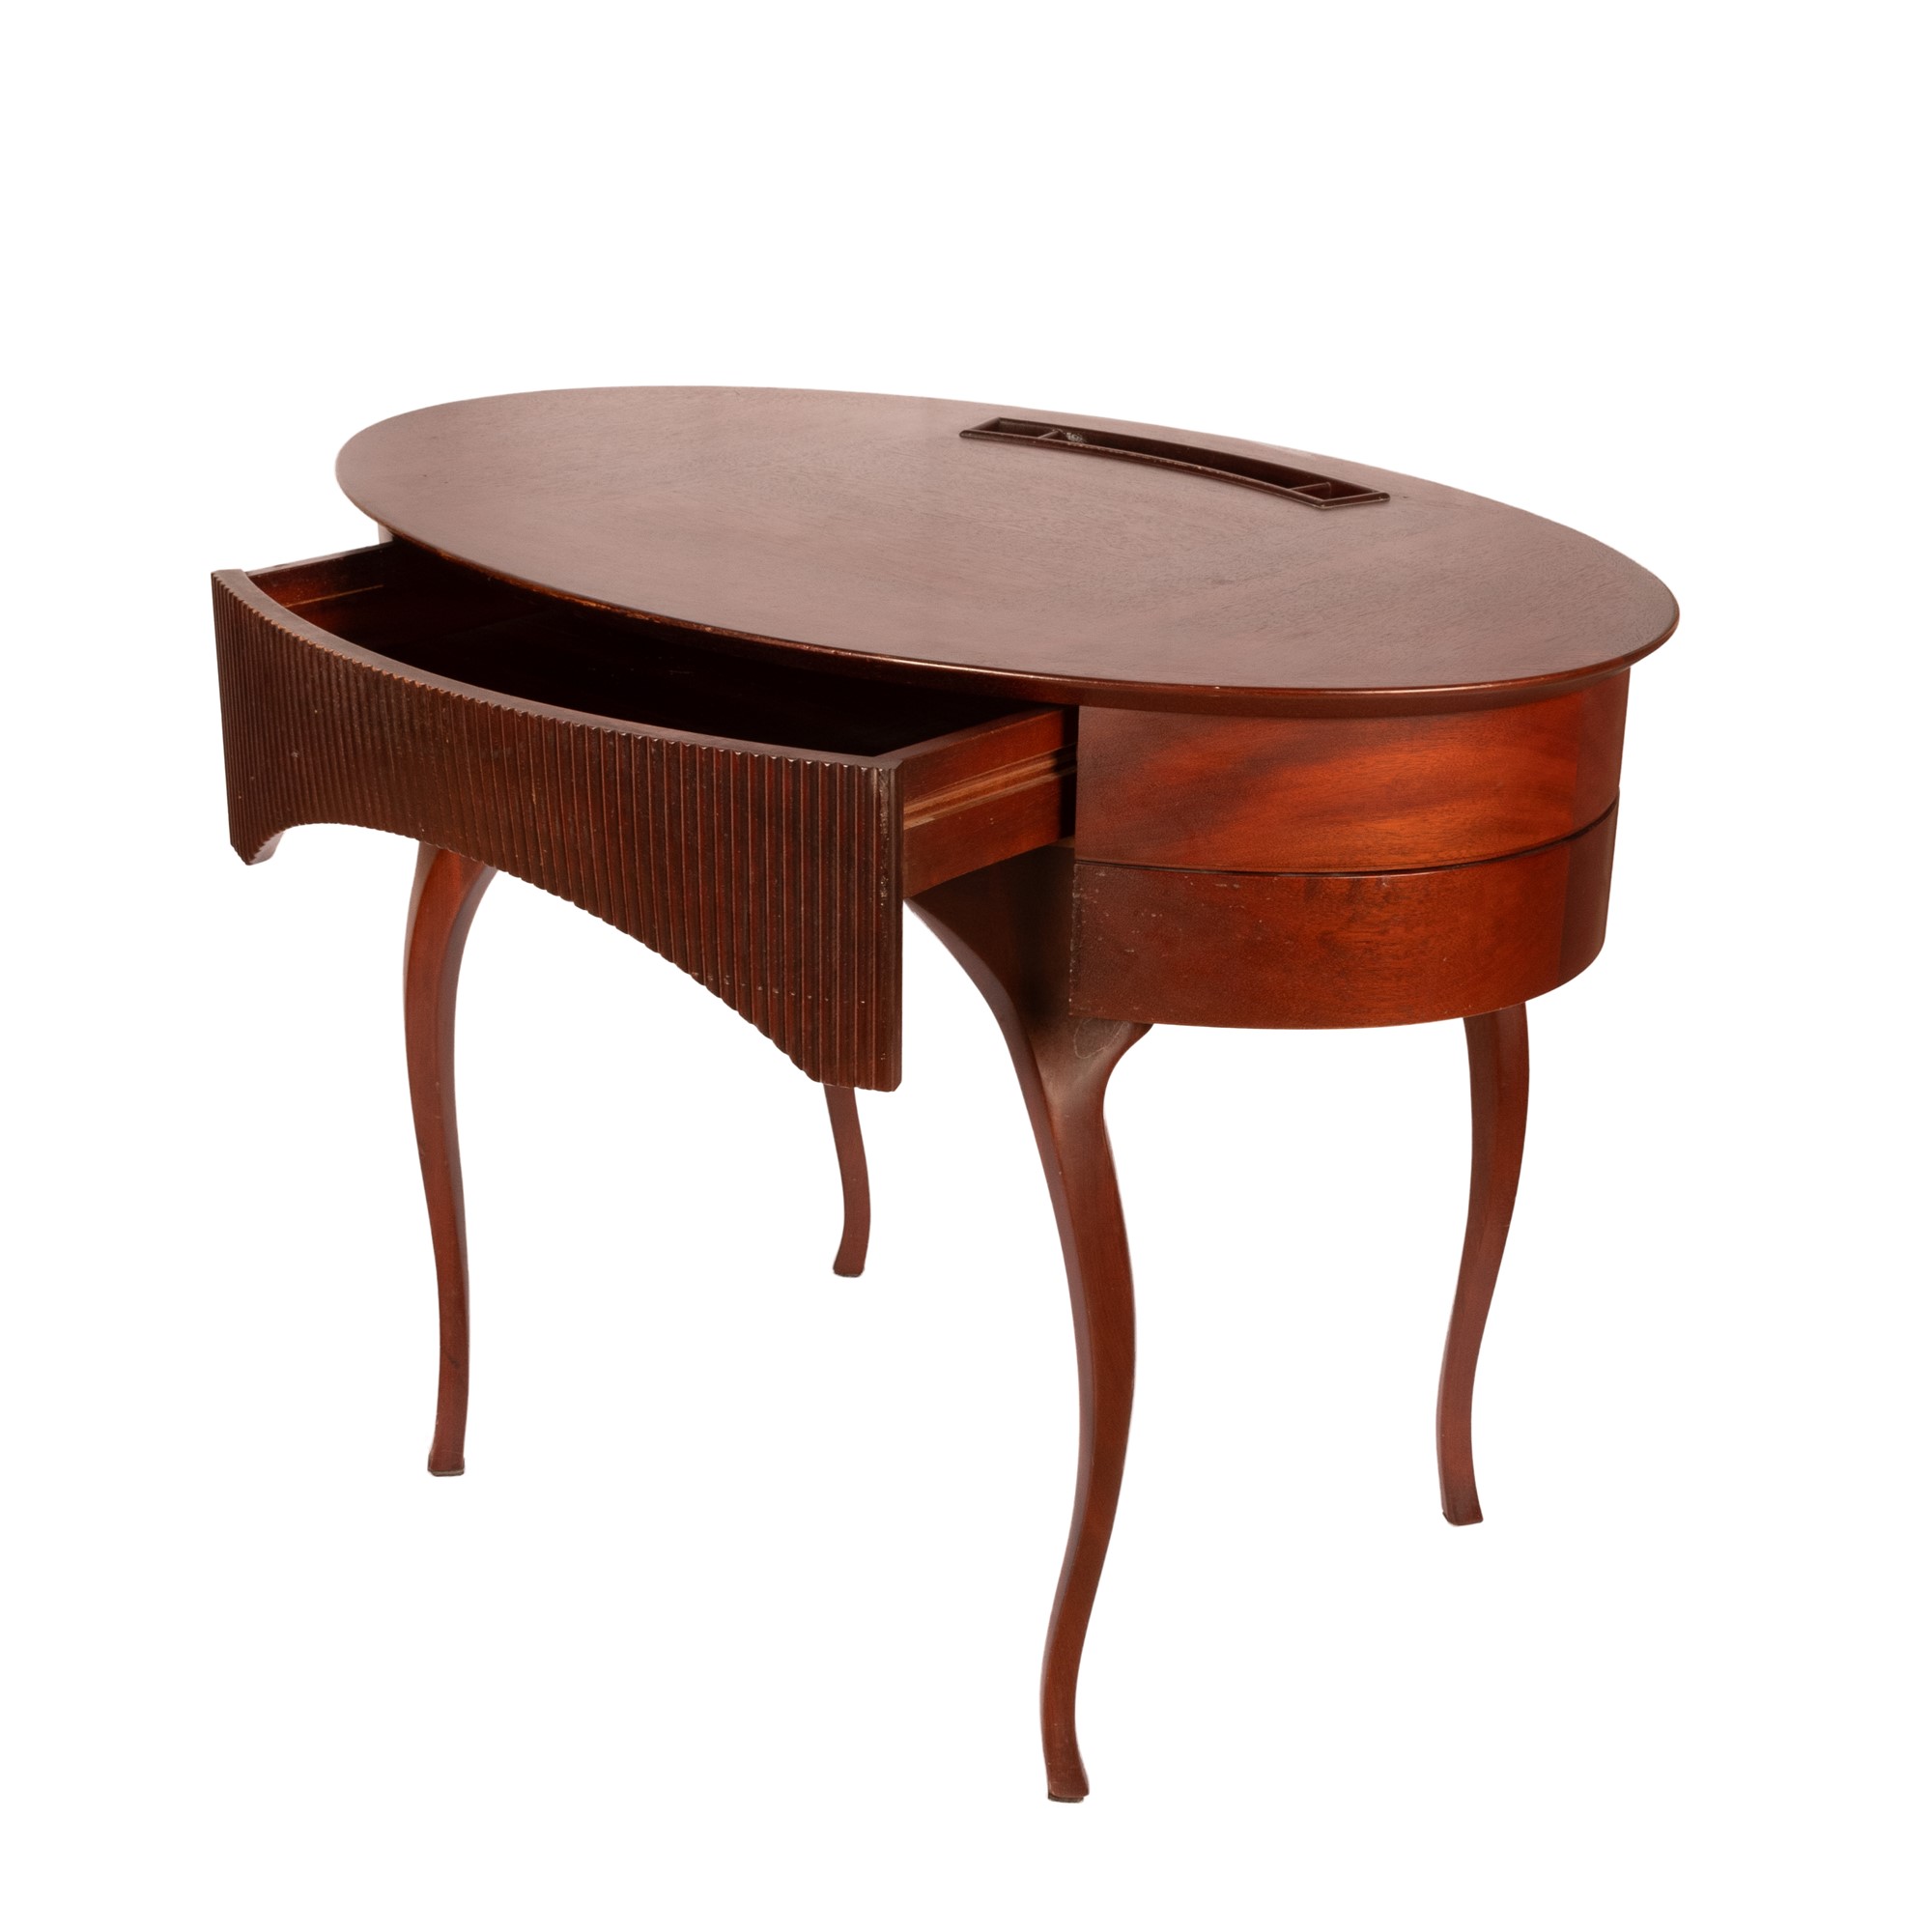 Writing desk in cherry wood - Image 4 of 25